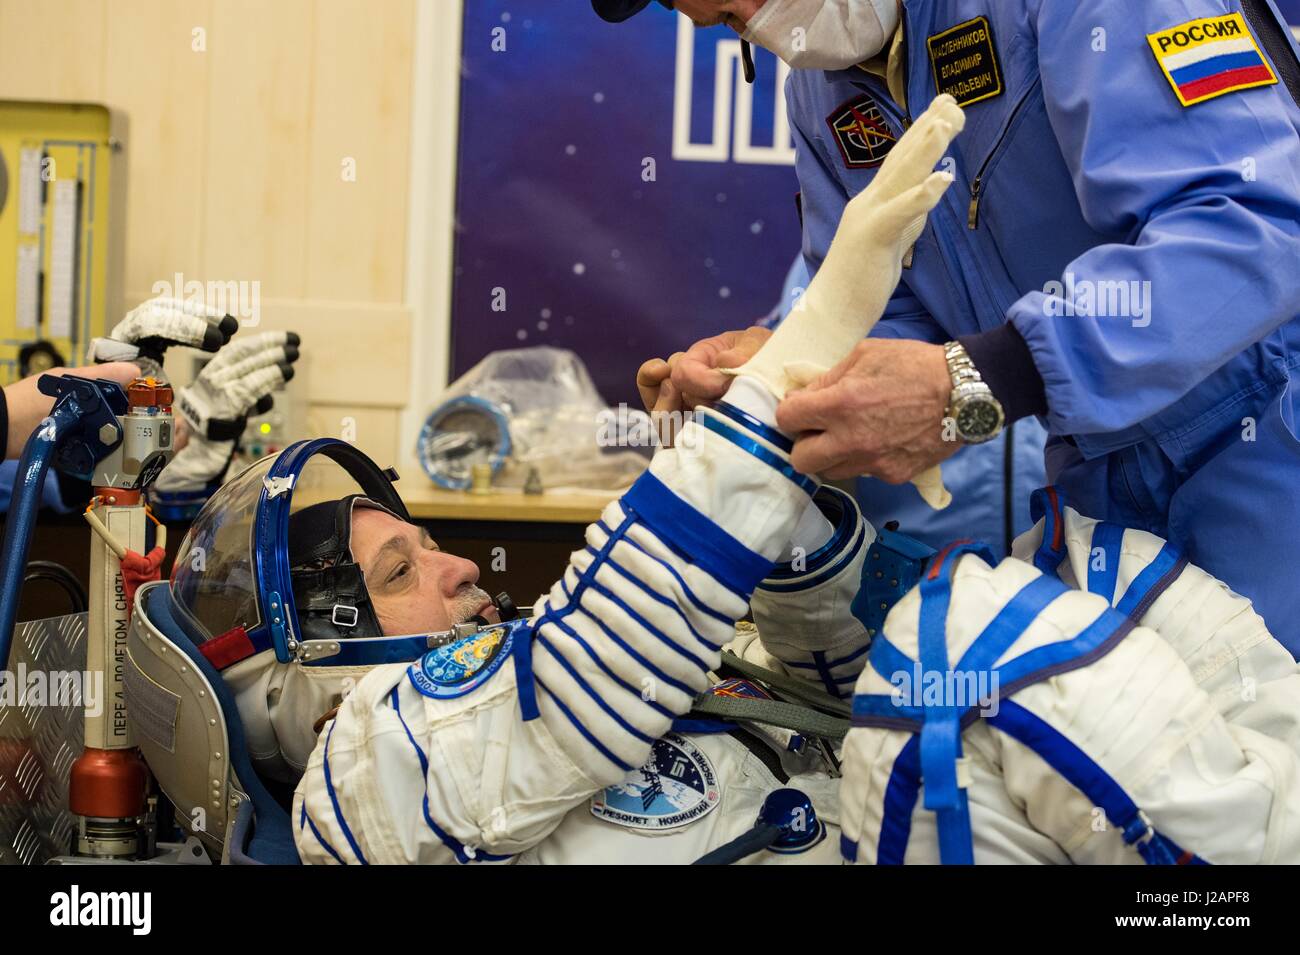 NASA International Space Station Expedition 51 prime crew member Russian cosmonaut Fyodor Yurchikhin of Roscosmos has his Russian Sokol launch and entry spacesuit pressure-checked in preparation for the Soyuz MS-04 launch at the Baikonur Cosmodrome April 20, 2017 in Baikonur, Kazakhstan.   (photo by Andrey Shelepin /NASA via Planetpix) Stock Photo